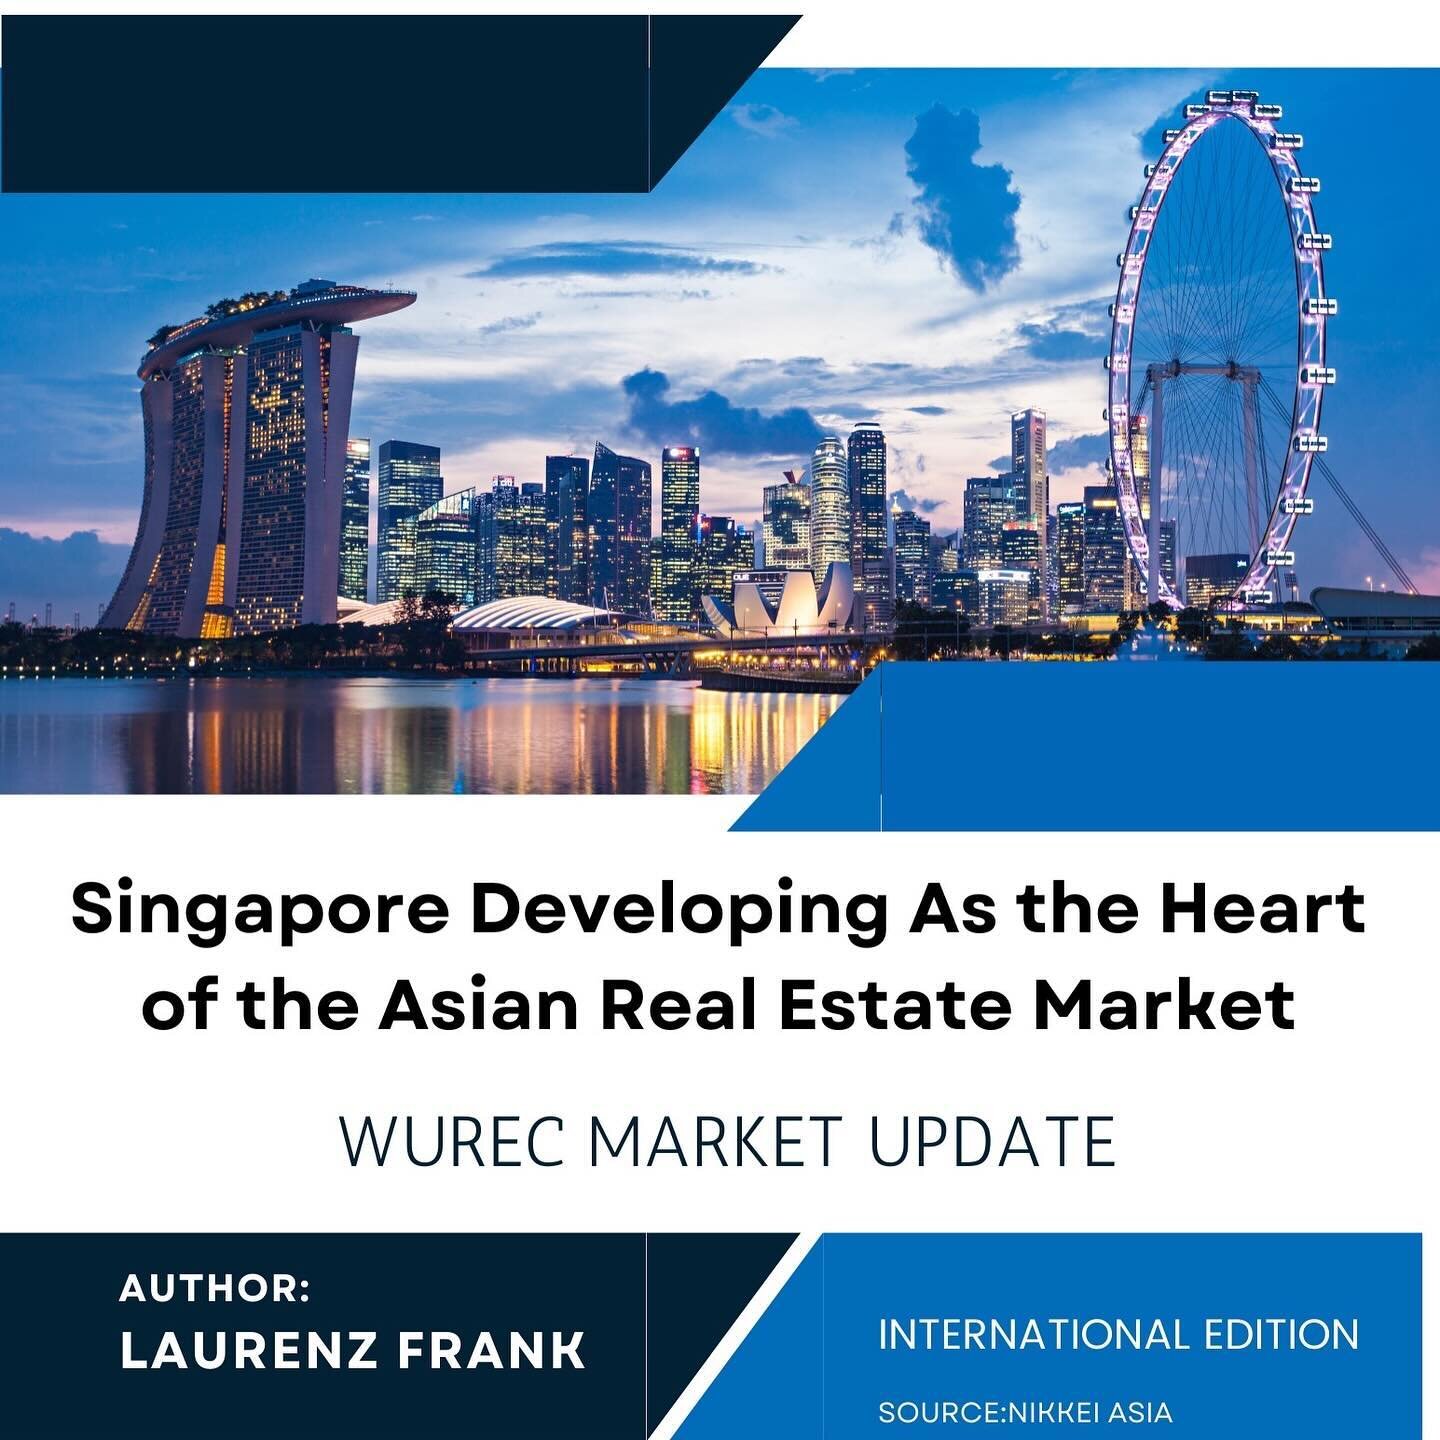 An incredible post about the development of the Singaporean real estate market as a trailblazer in the Asian hub!